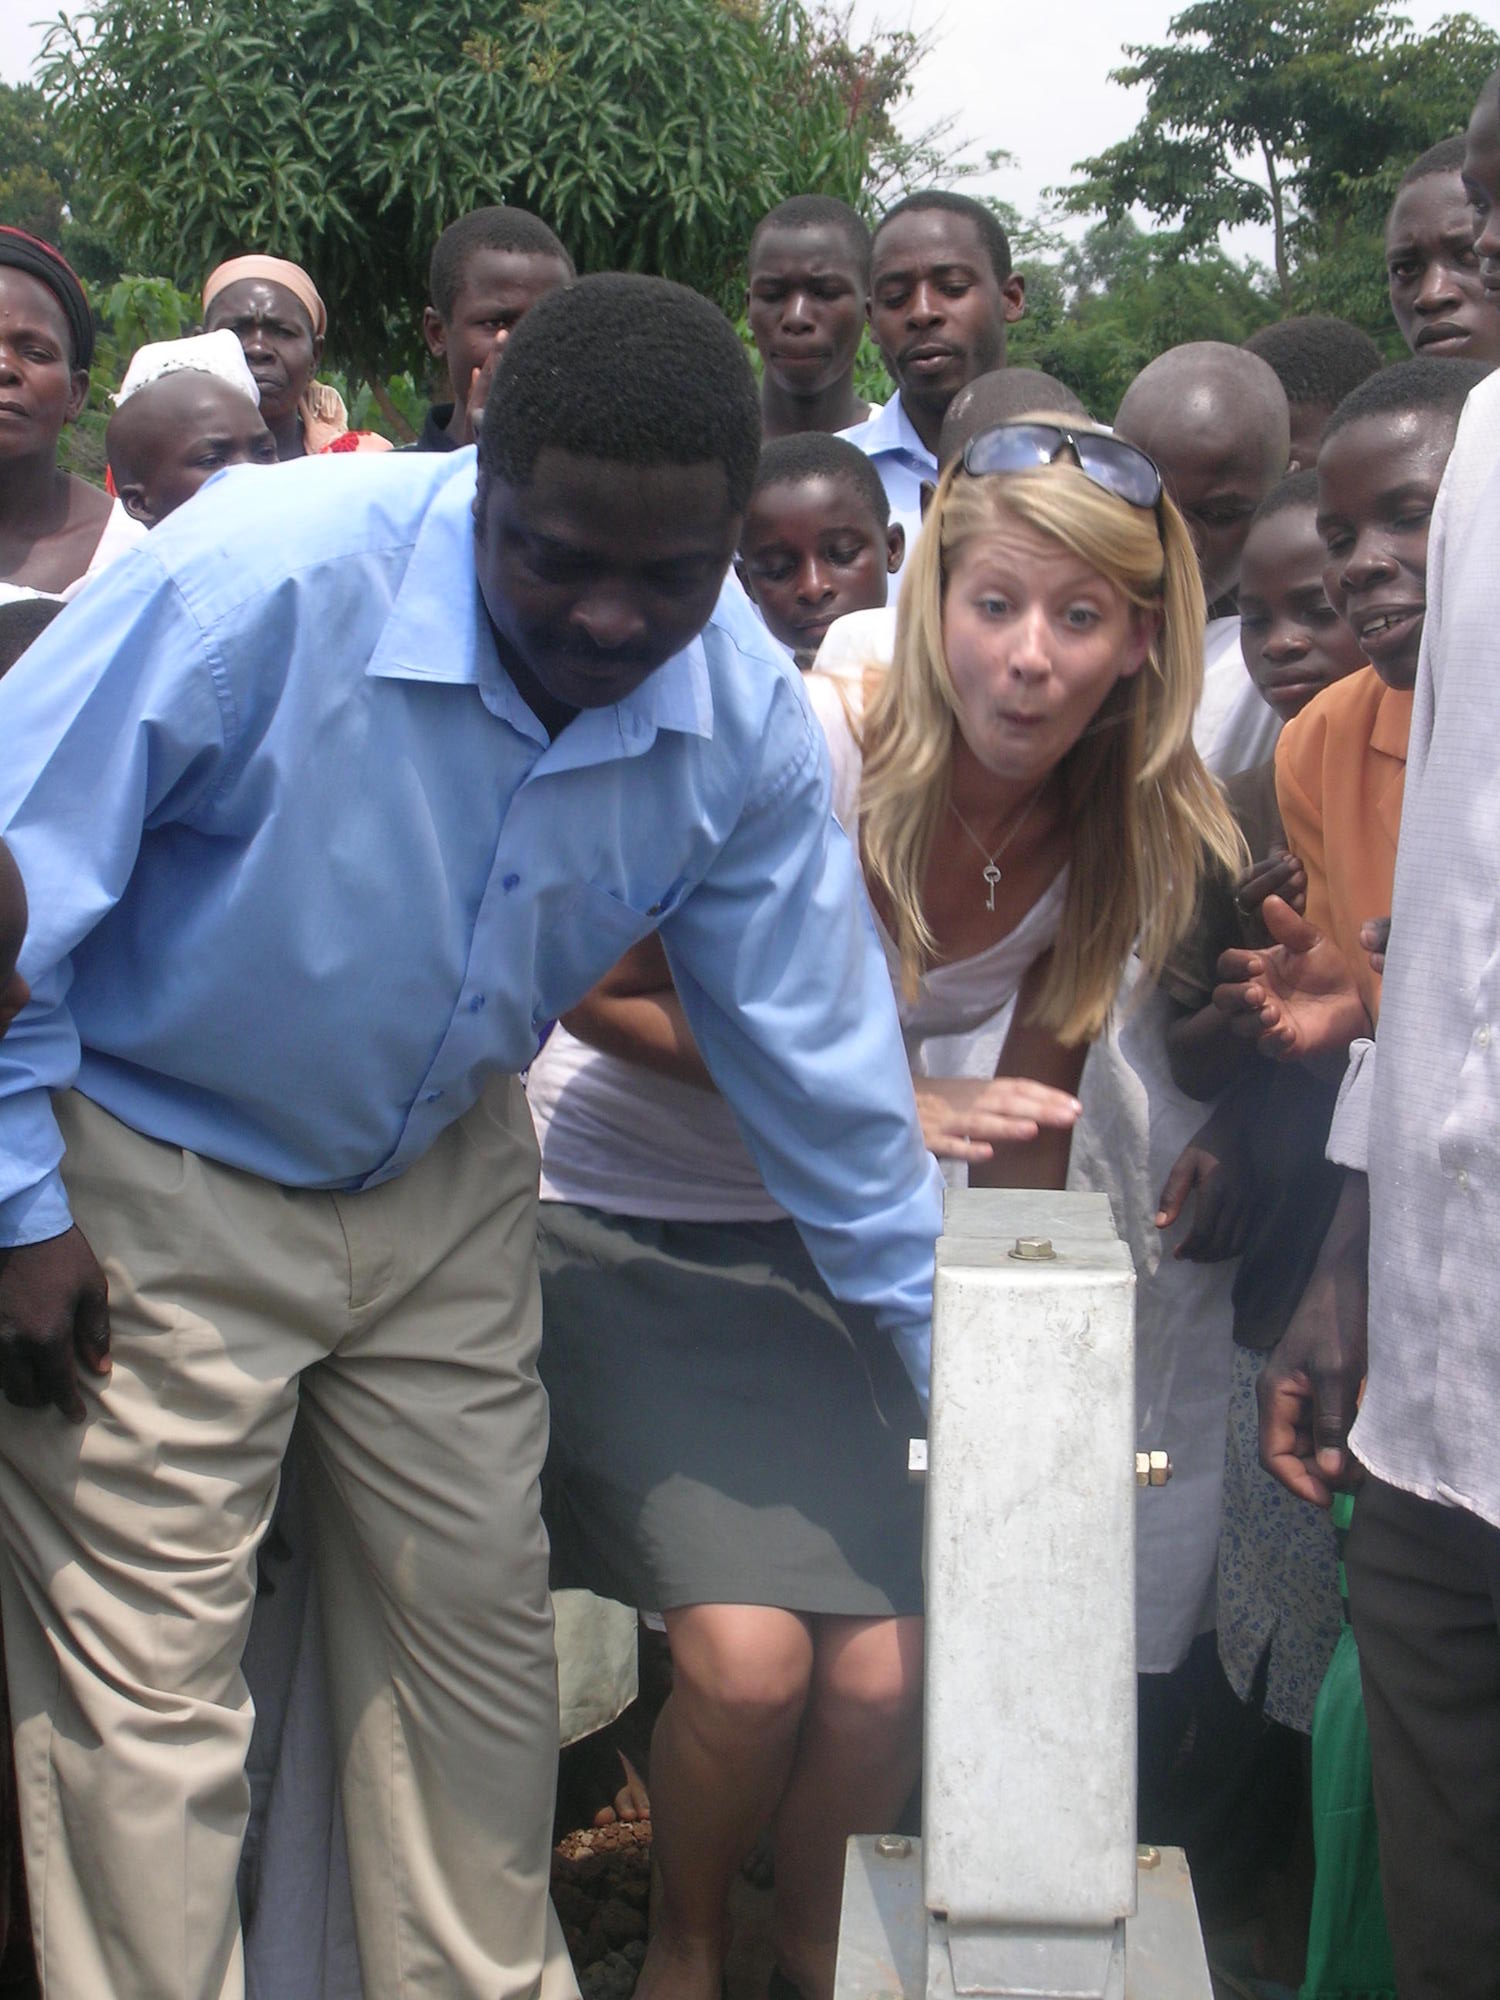 Crowd of people around a water pump